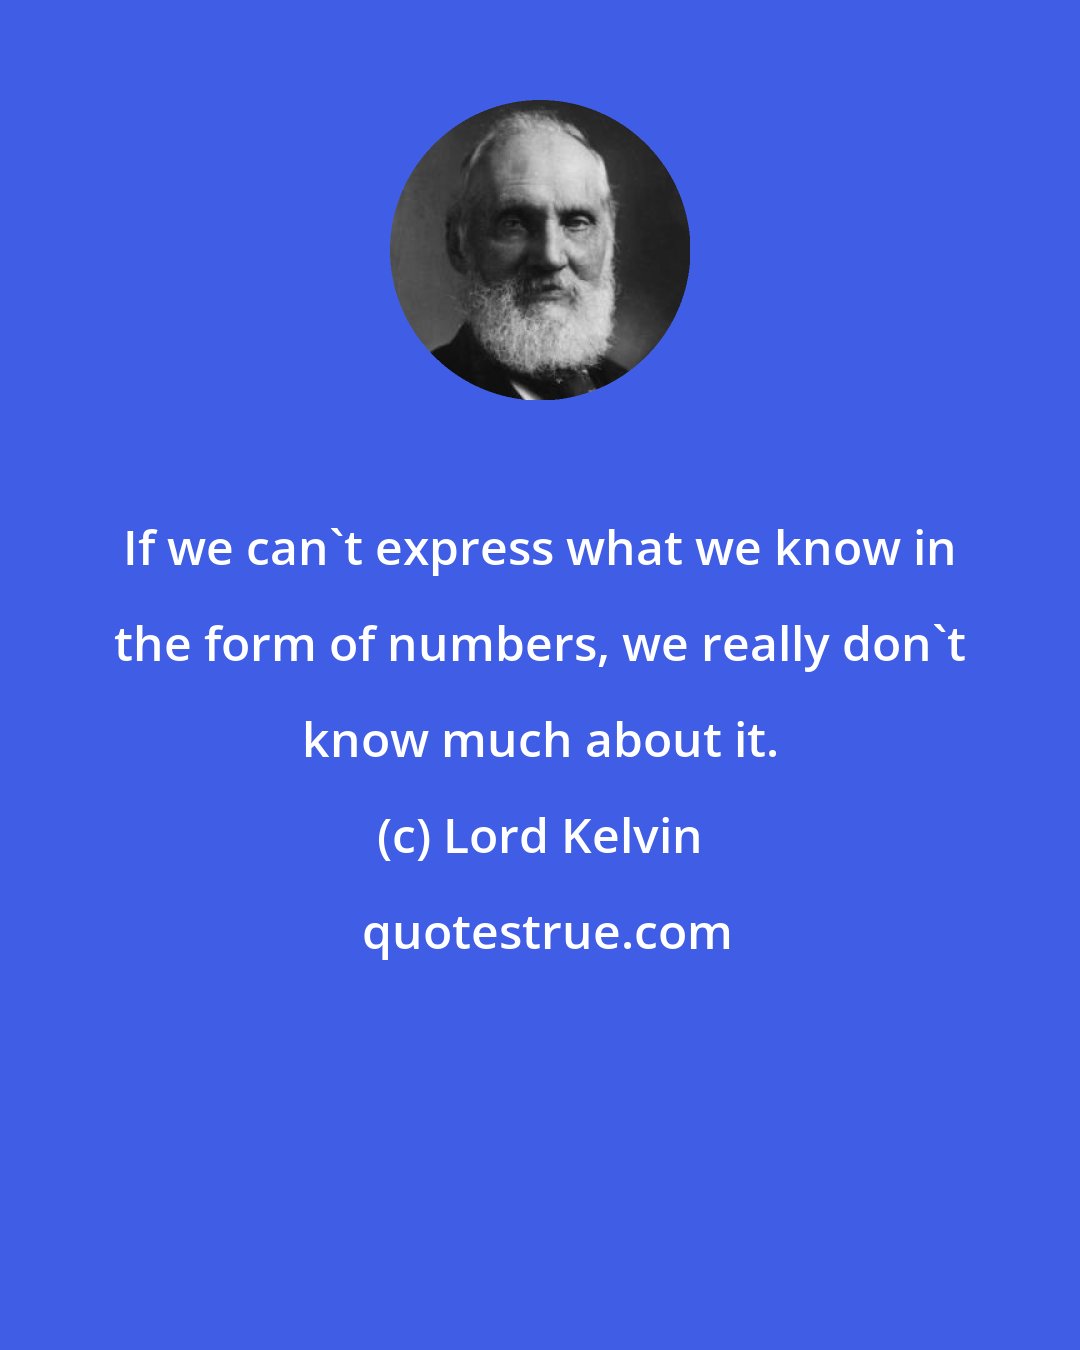 Lord Kelvin: If we can't express what we know in the form of numbers, we really don't know much about it.